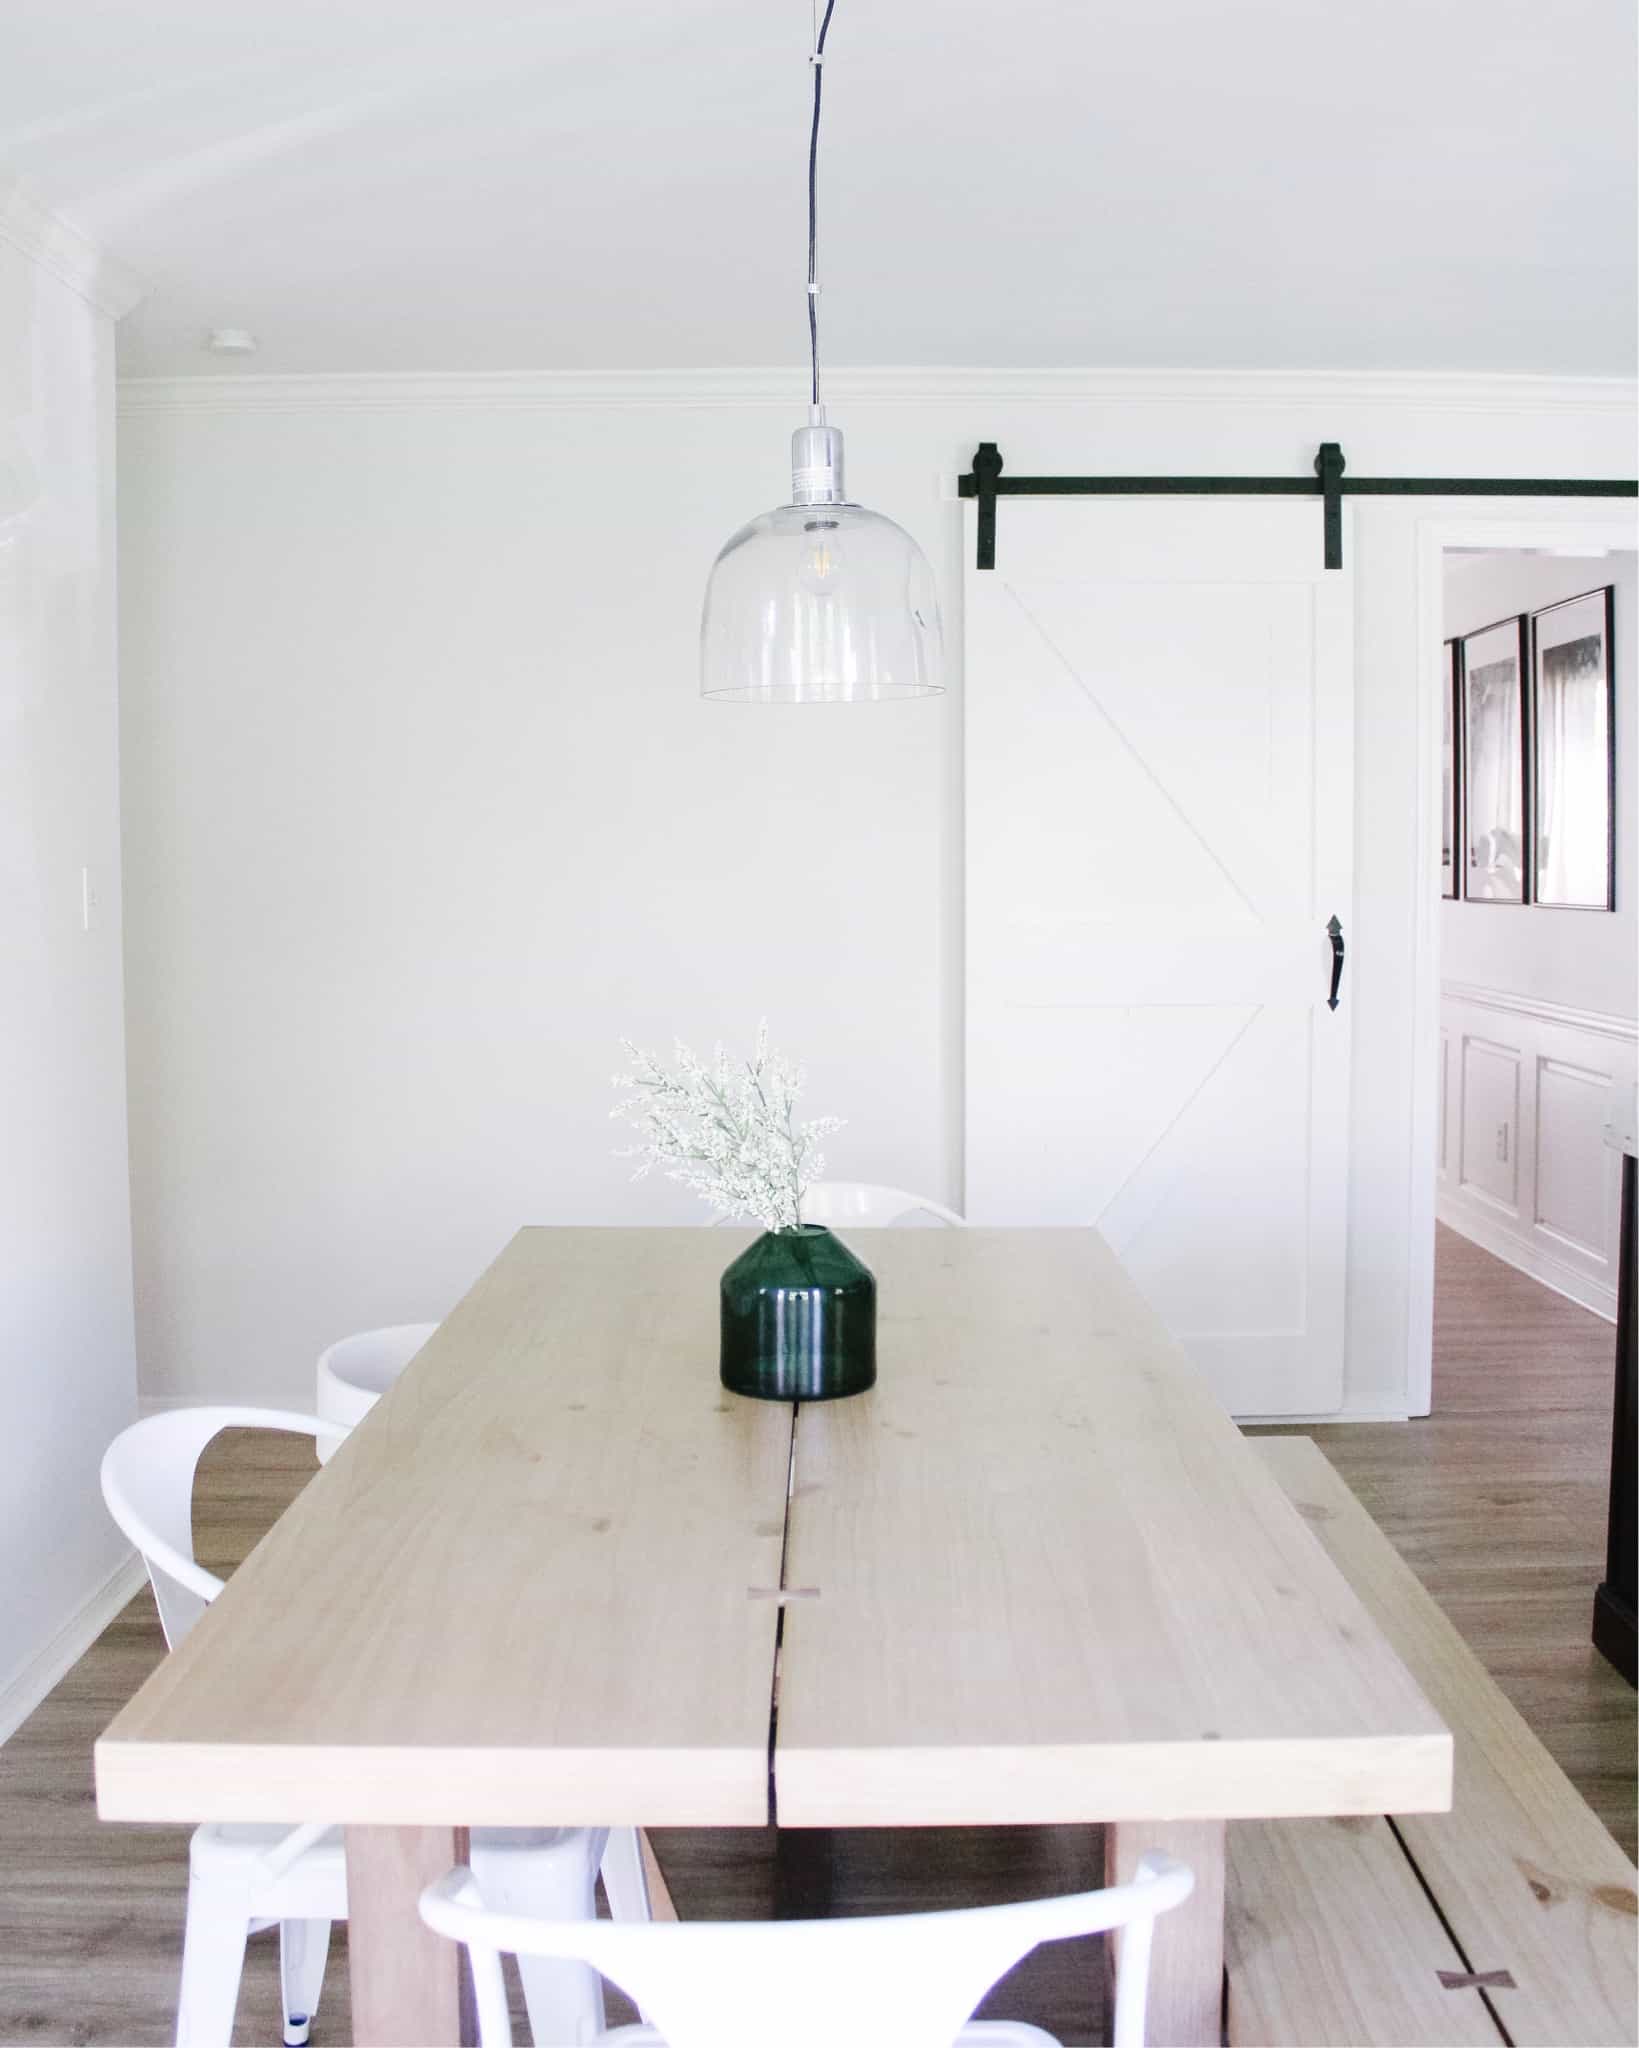 kitchen table with green vase on it and barn door